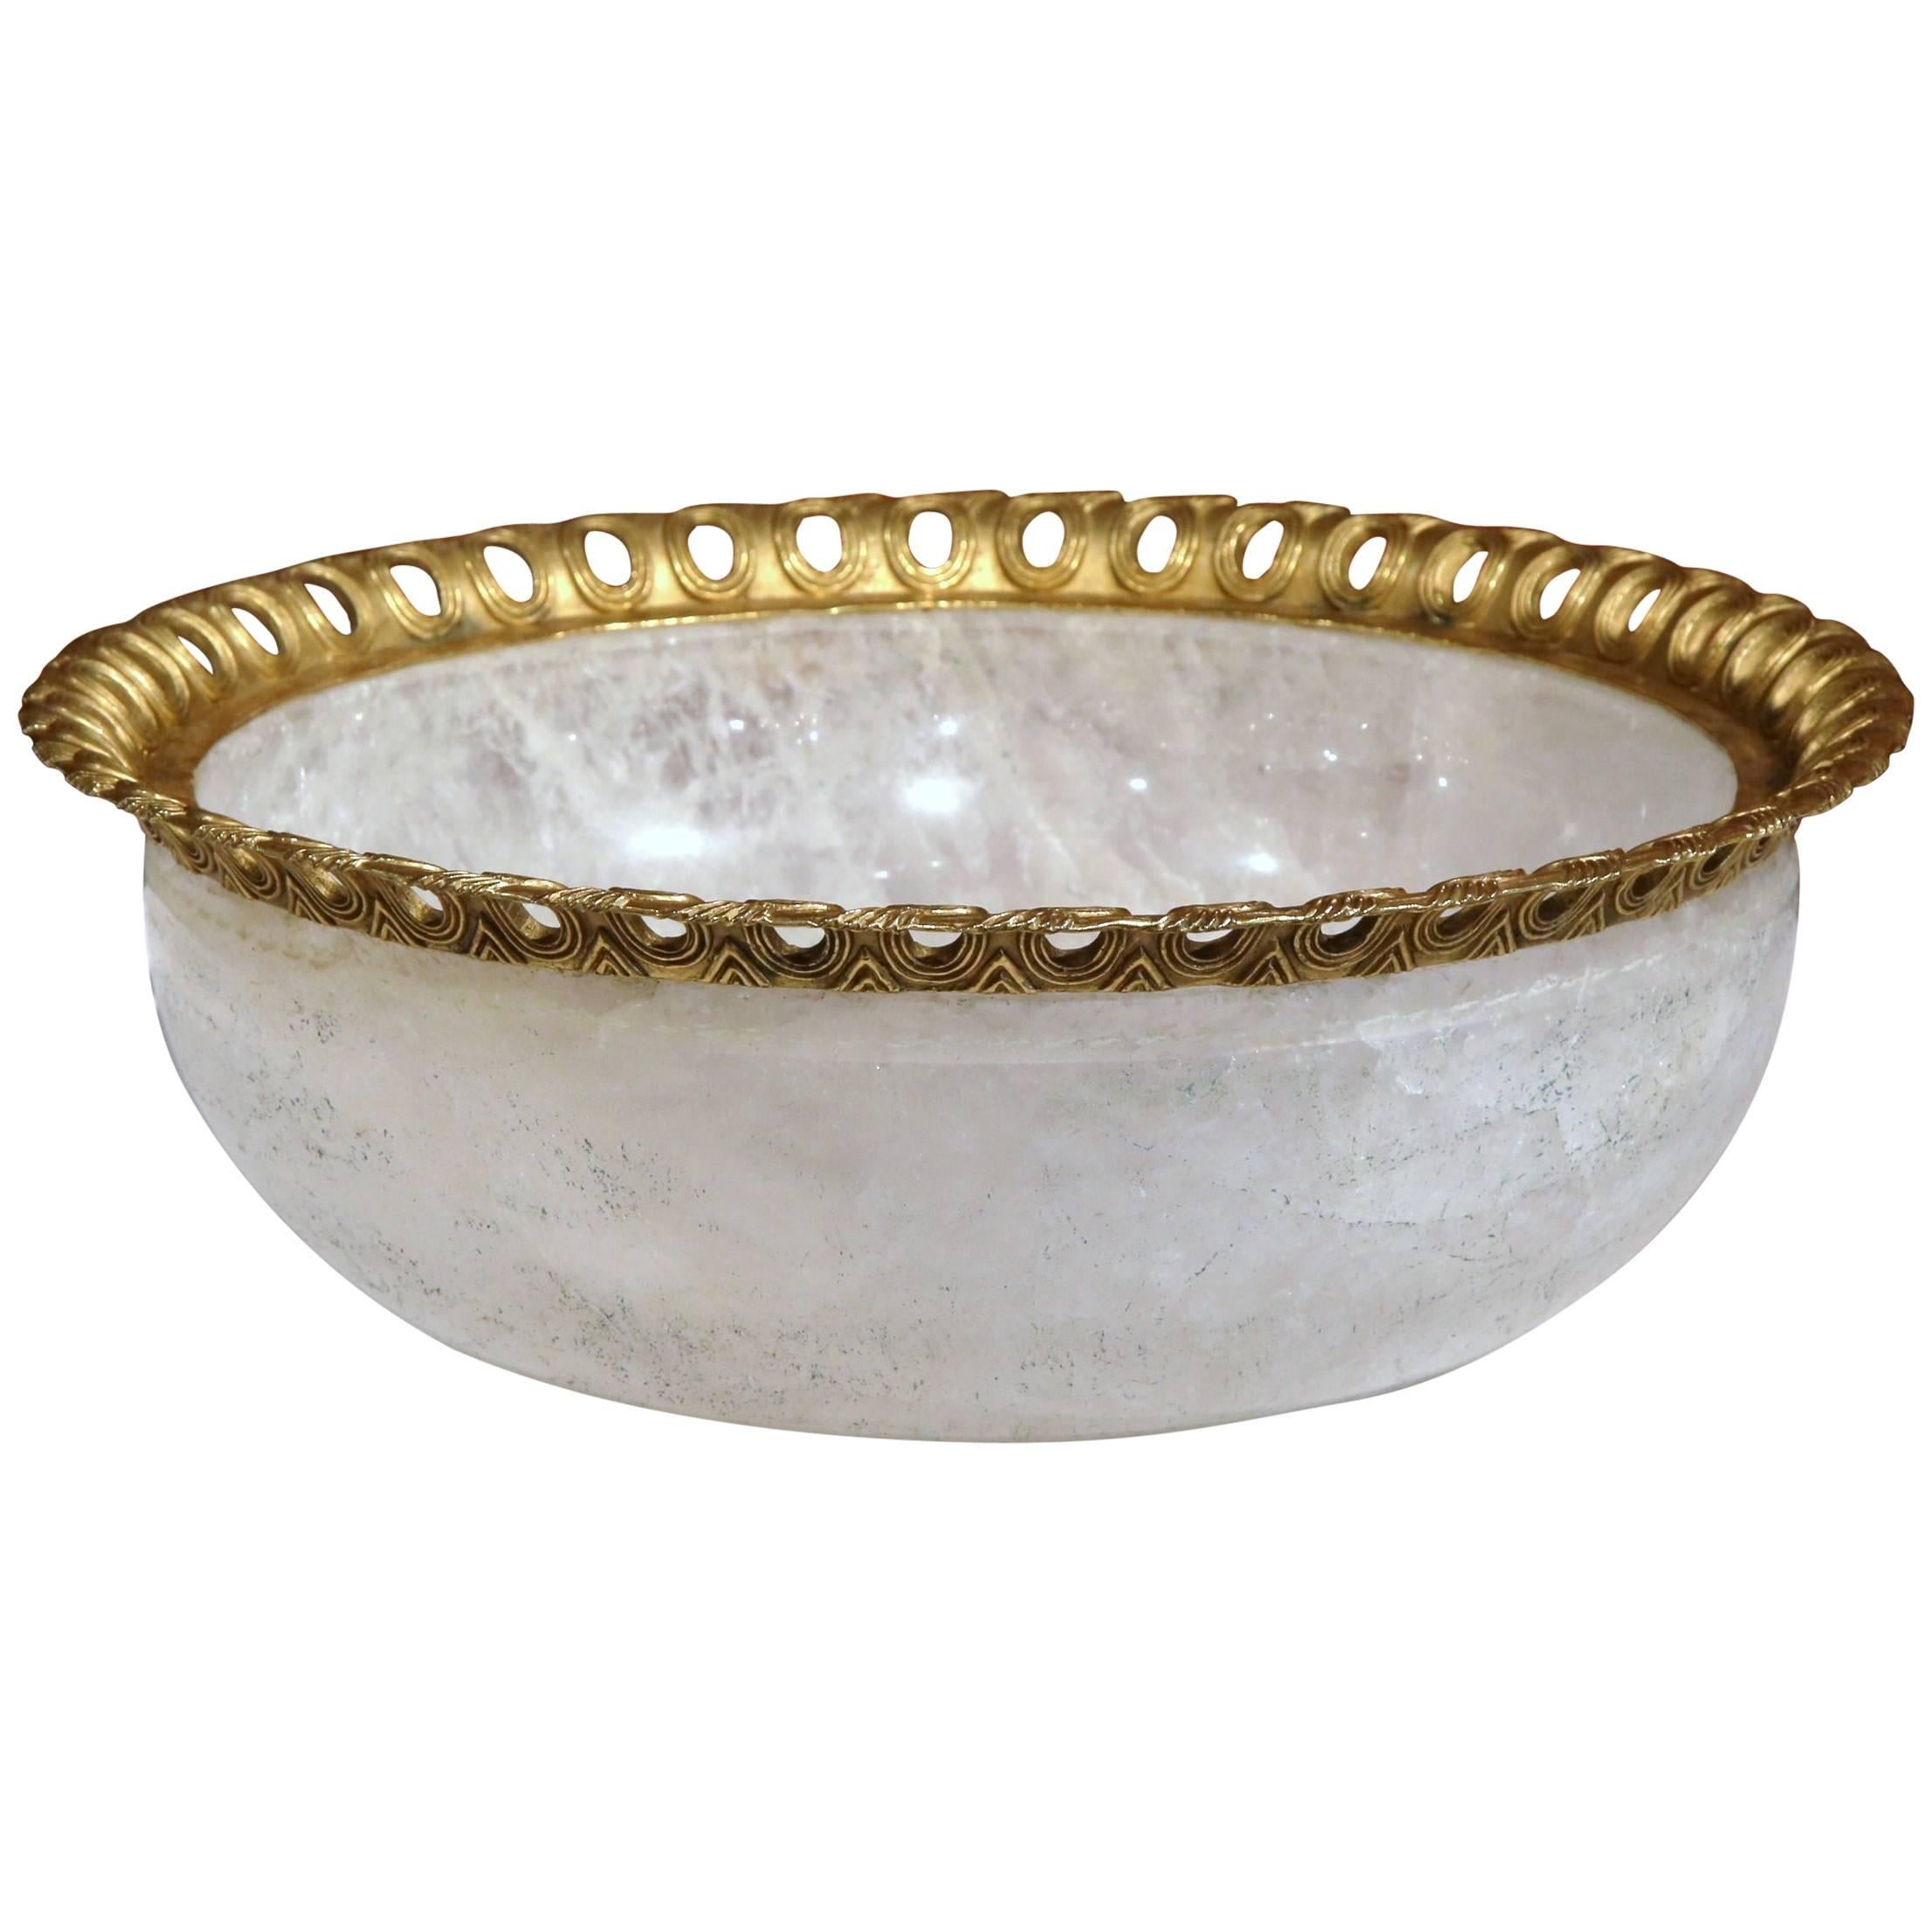 Large Solid Rock Crystal Center Bowl with Brass Trim